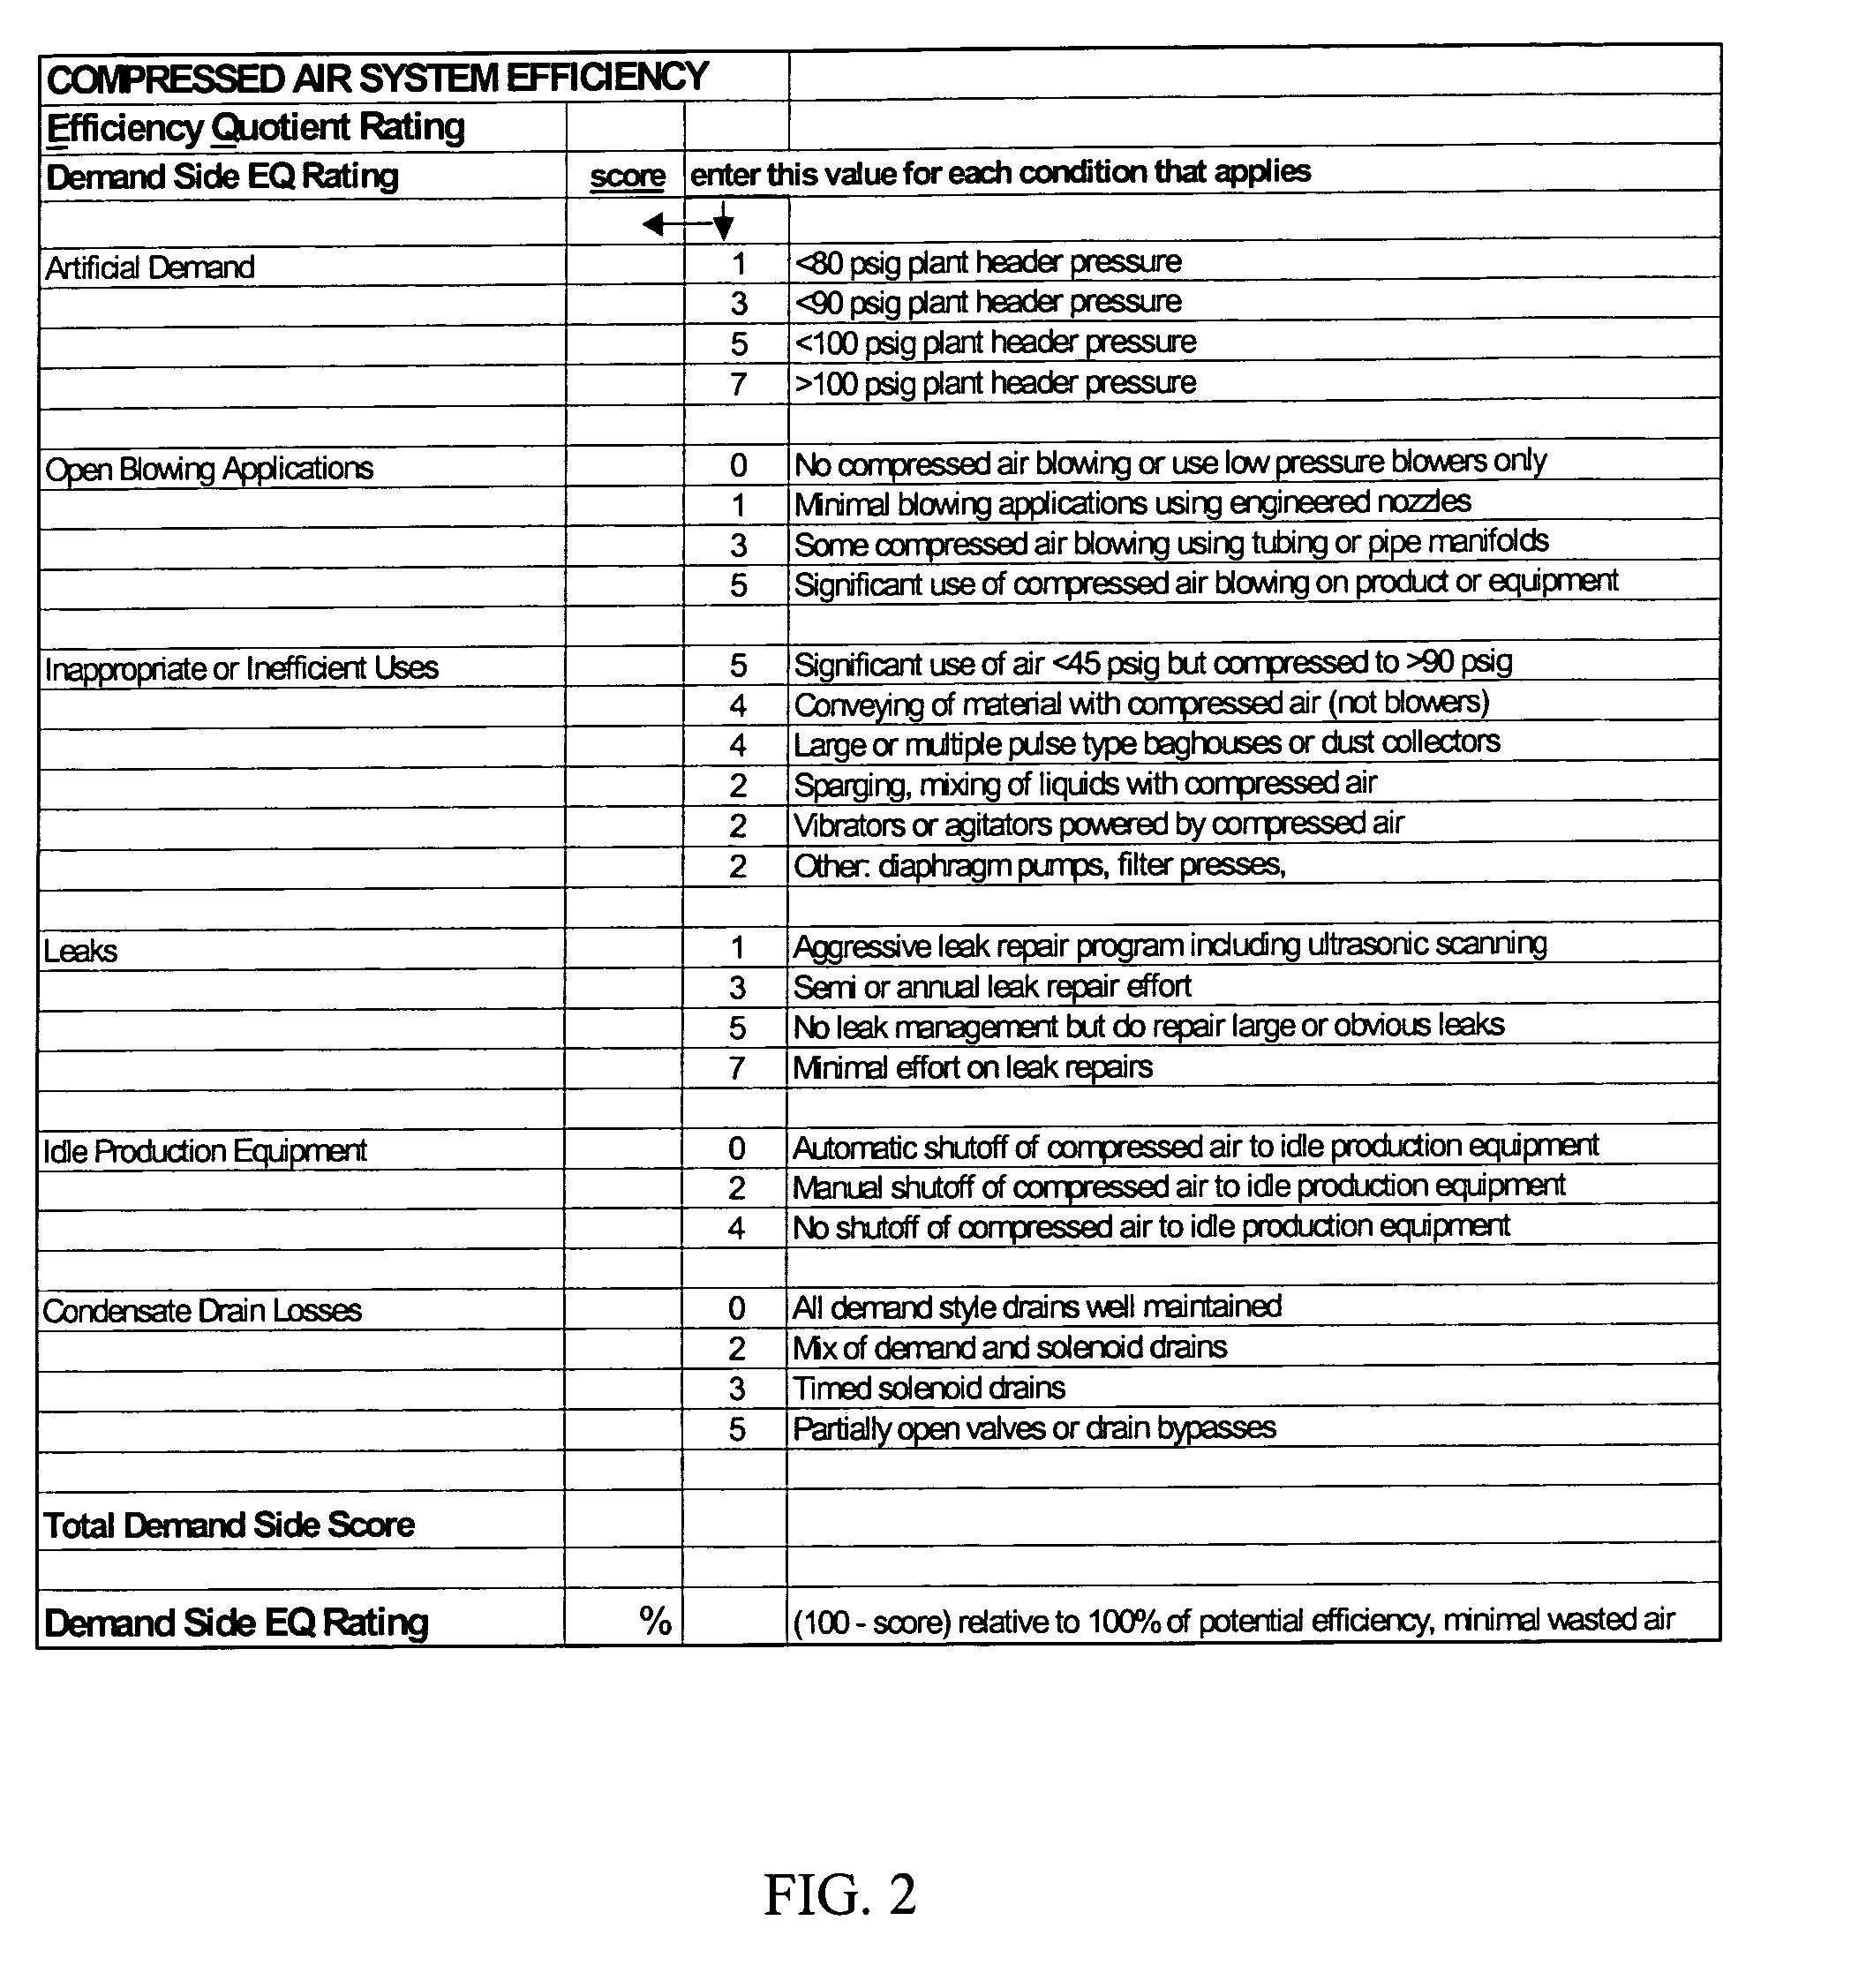 Method and system for rating the efficiency of a compressed air system